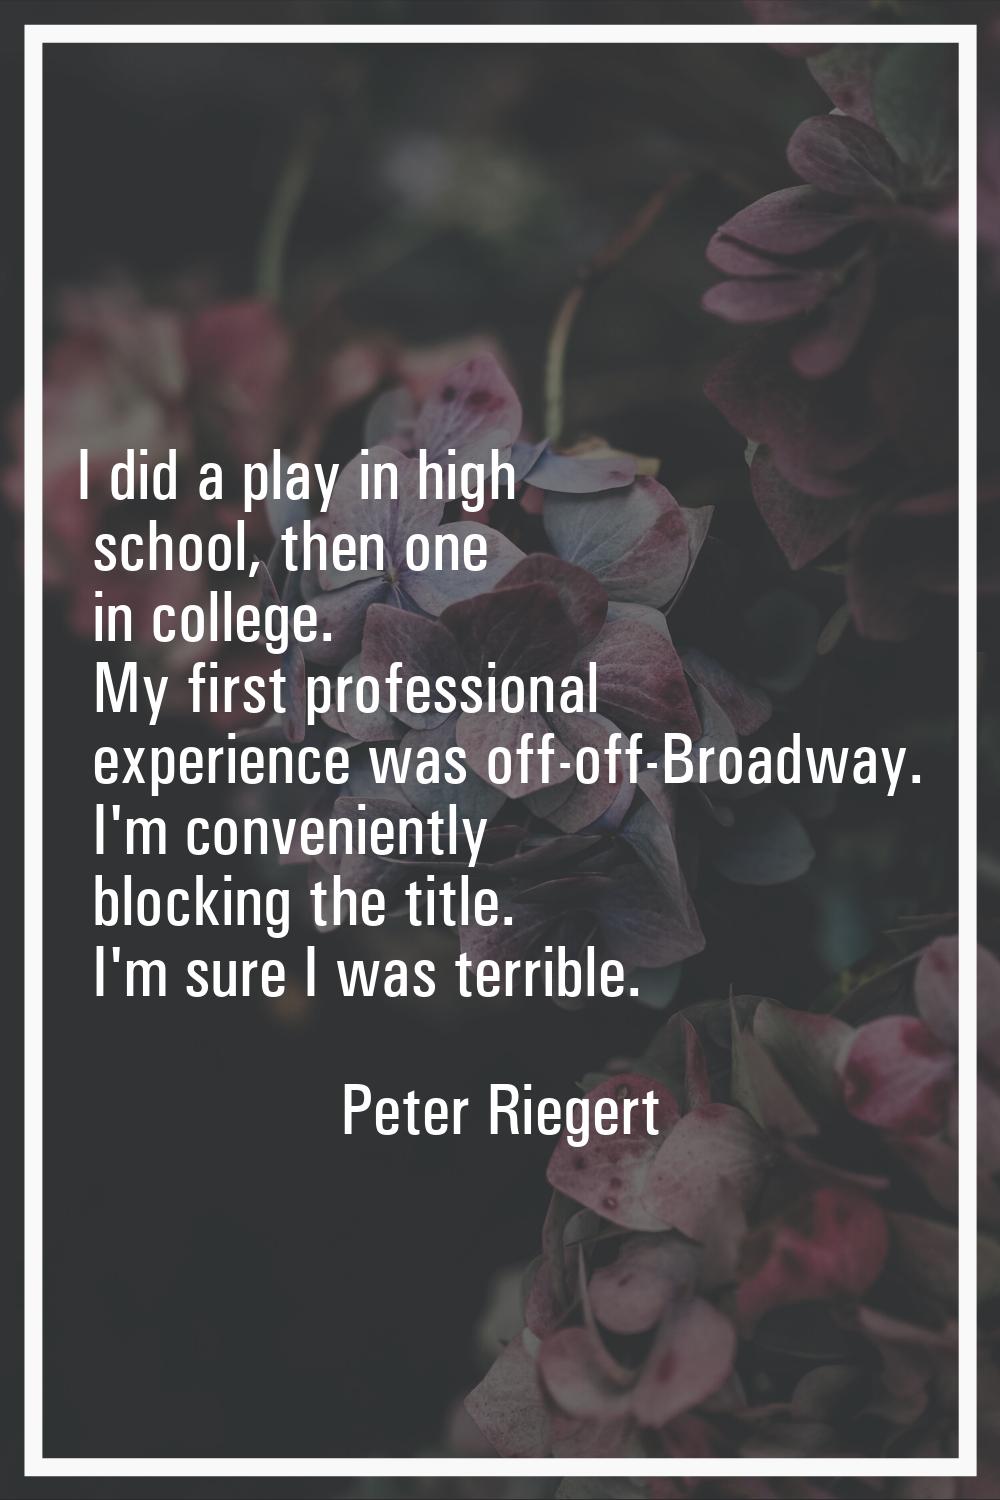 I did a play in high school, then one in college. My first professional experience was off-off-Broa